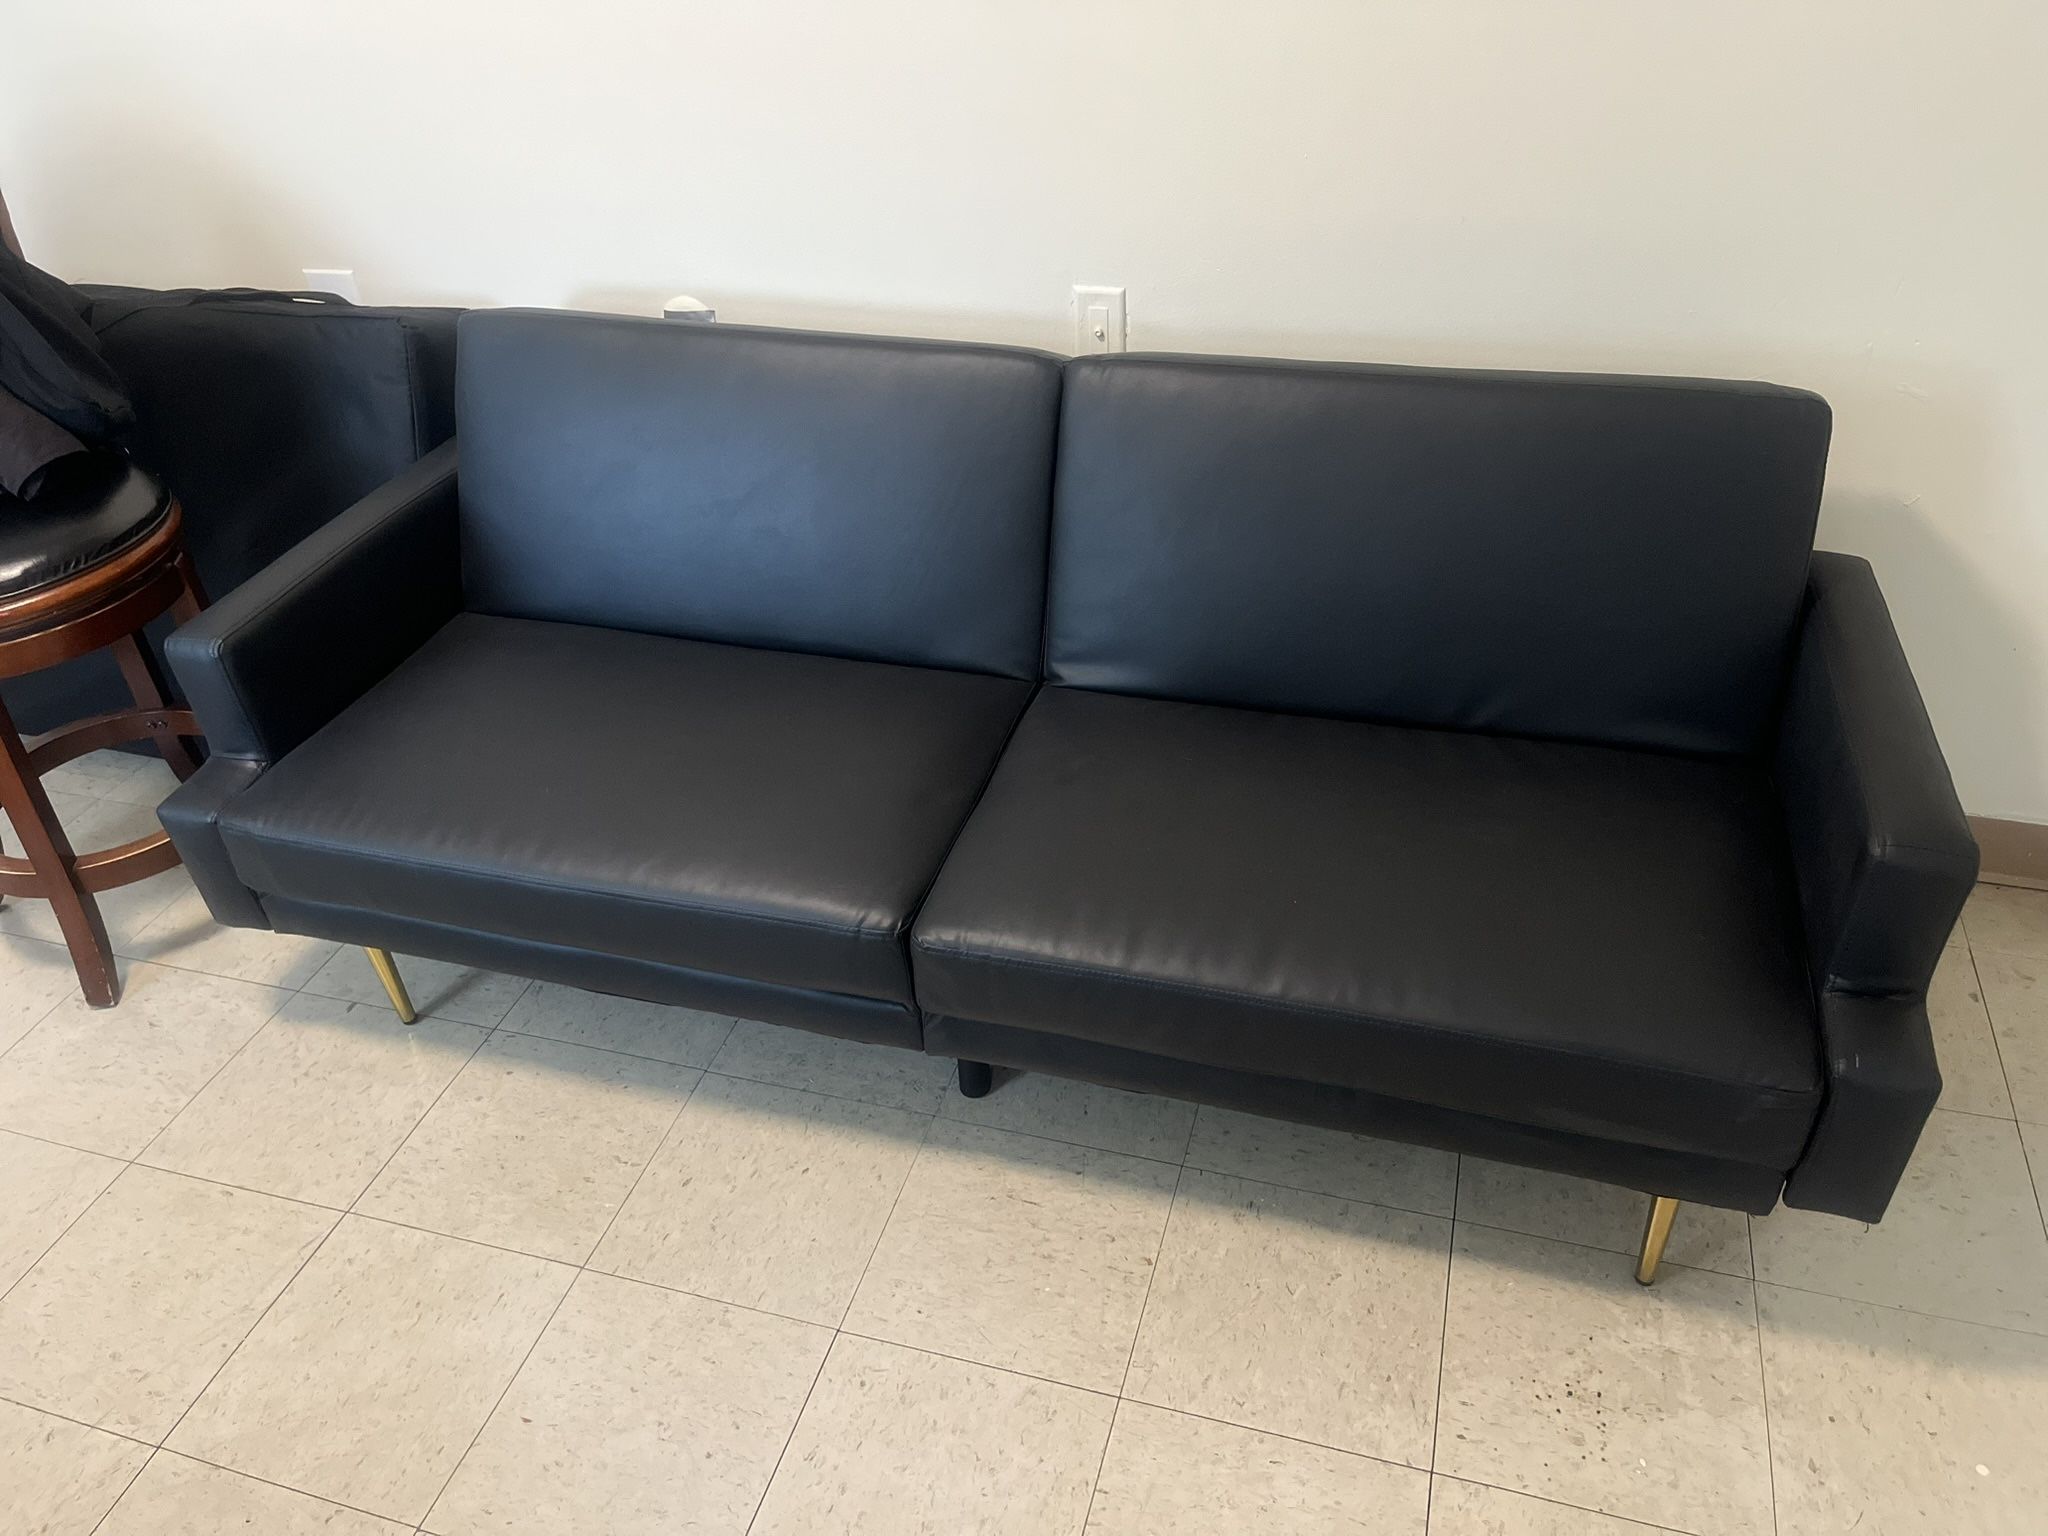 NEW FAUX LEATHER FUTON COUCH/BED